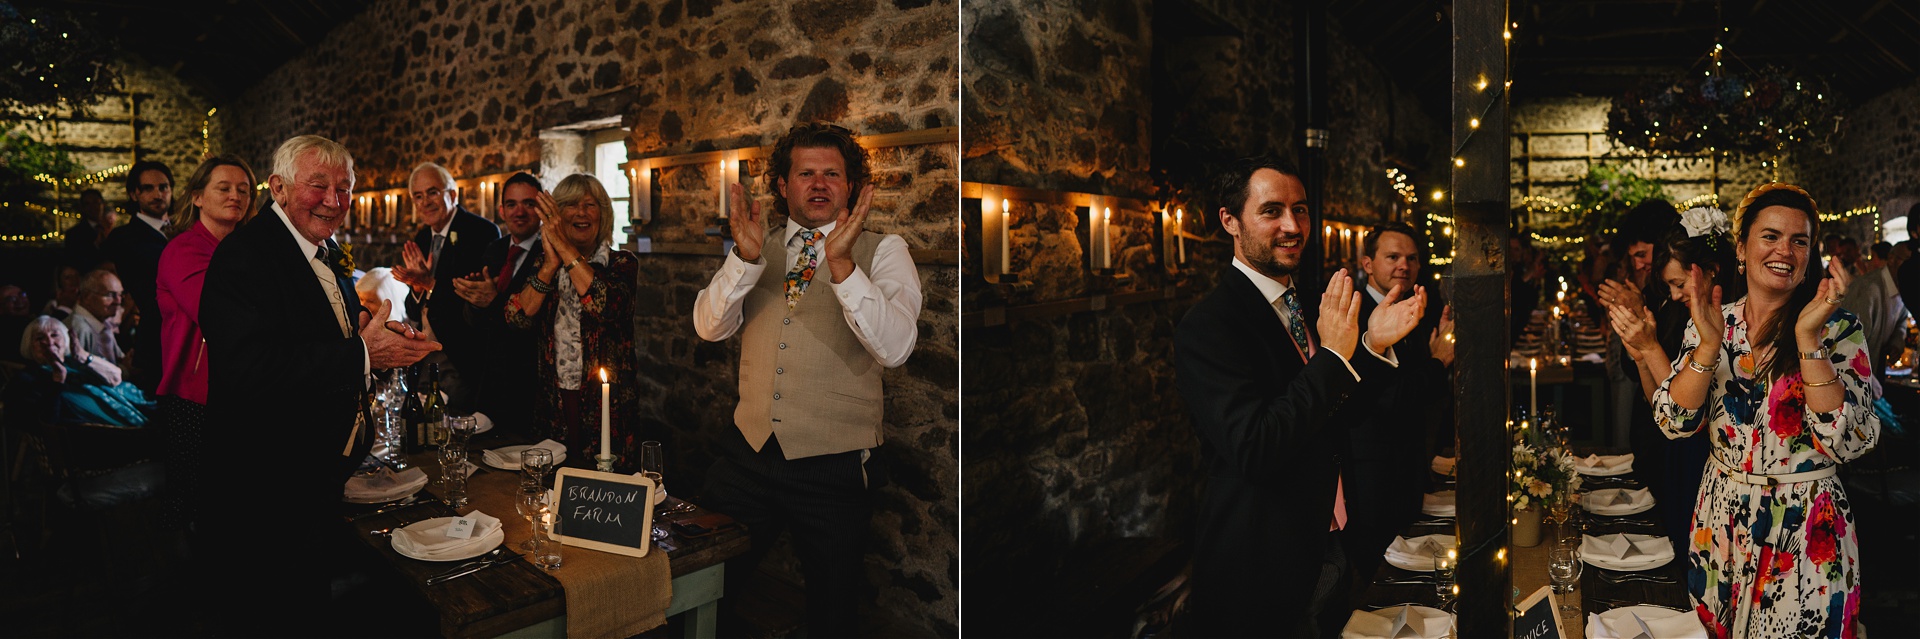 Wedding guests applauding in an amazingly atmospheric barn setting